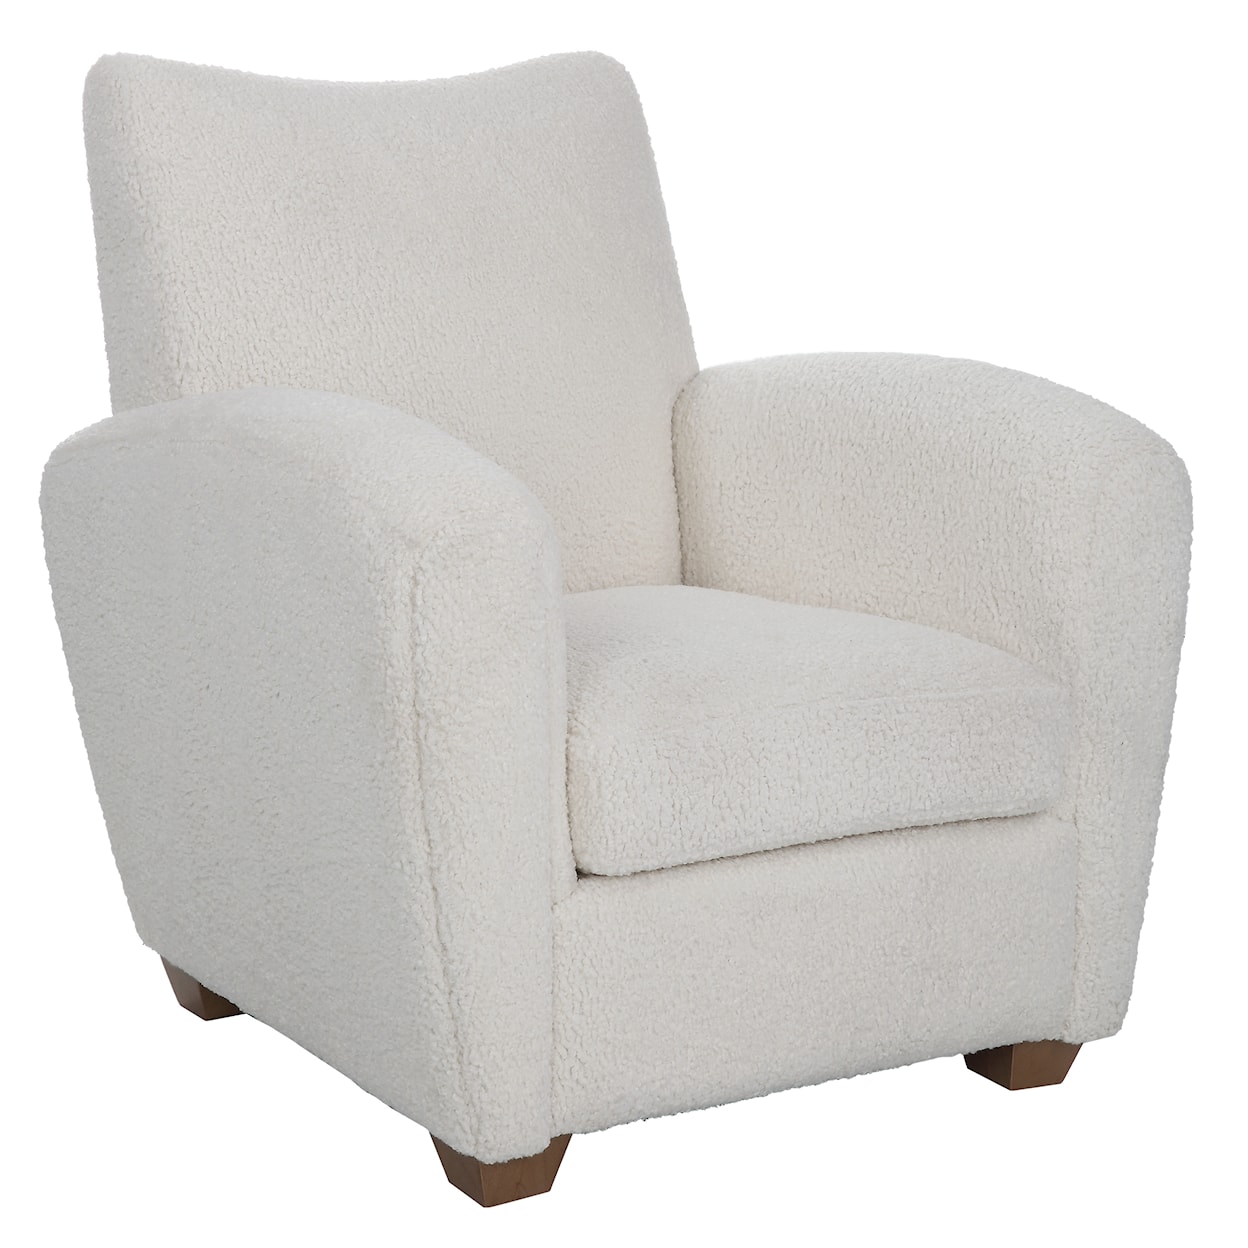 Uttermost Teddy Teddy White Shearling Accent Chair